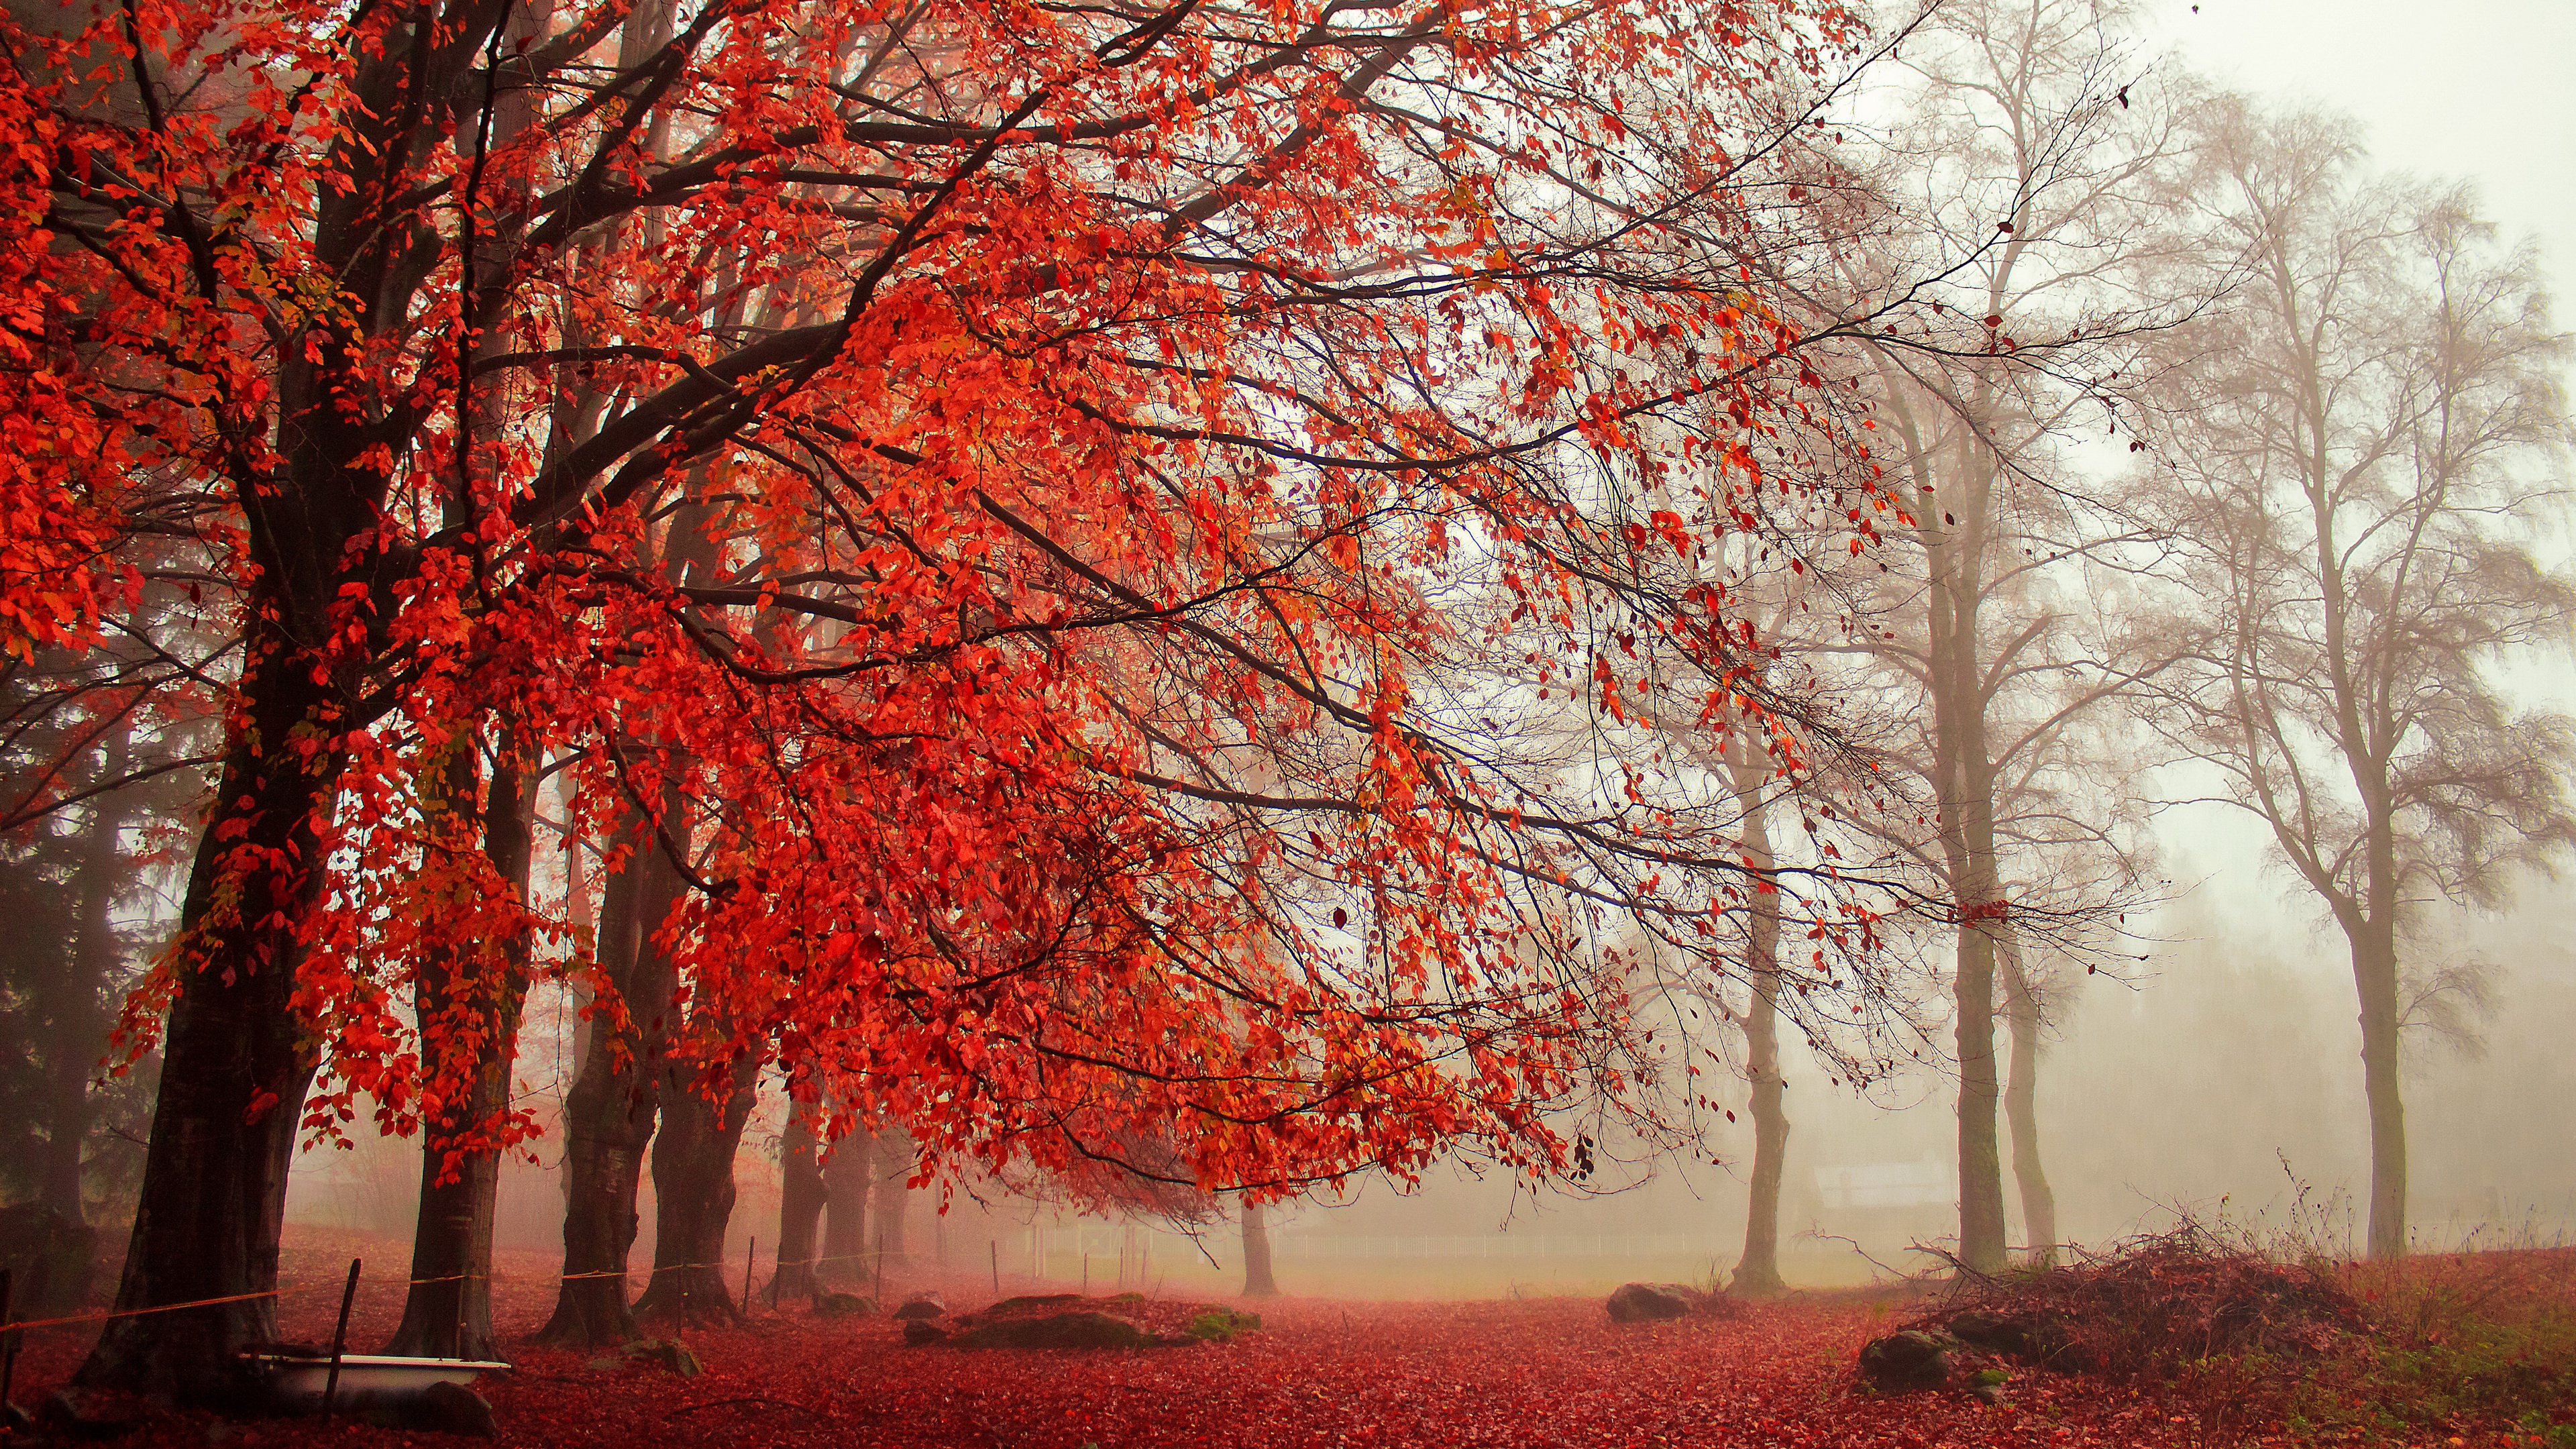 General 3840x2160 fall outdoors trees fallen leaves